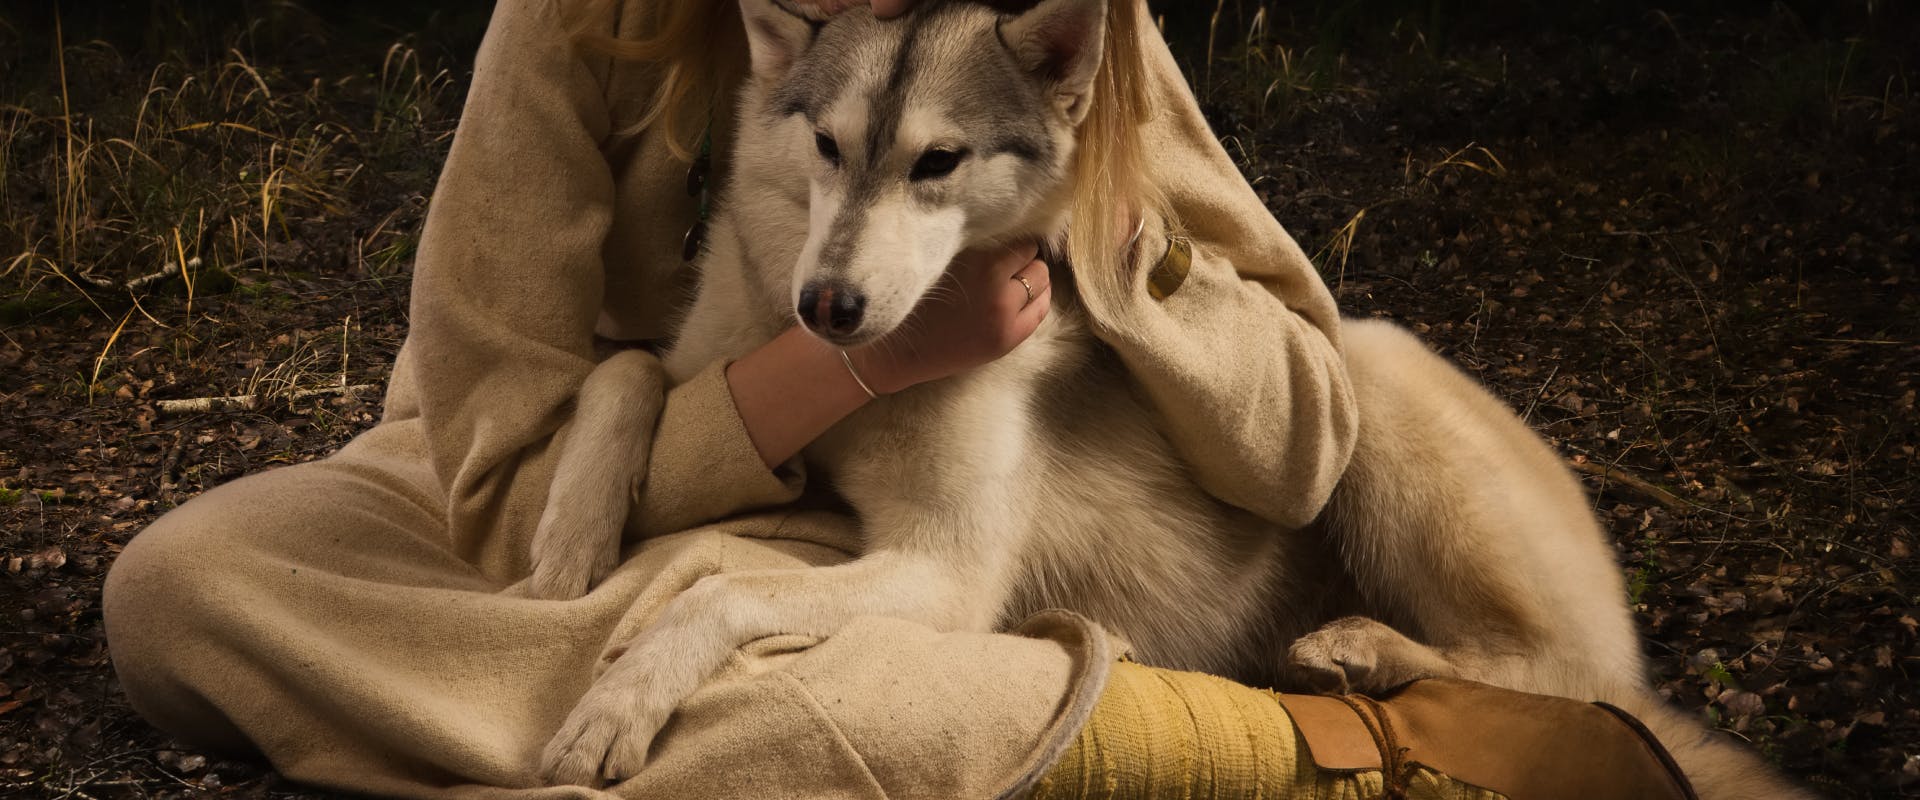 husky being cuddled by someone dressed as a viking